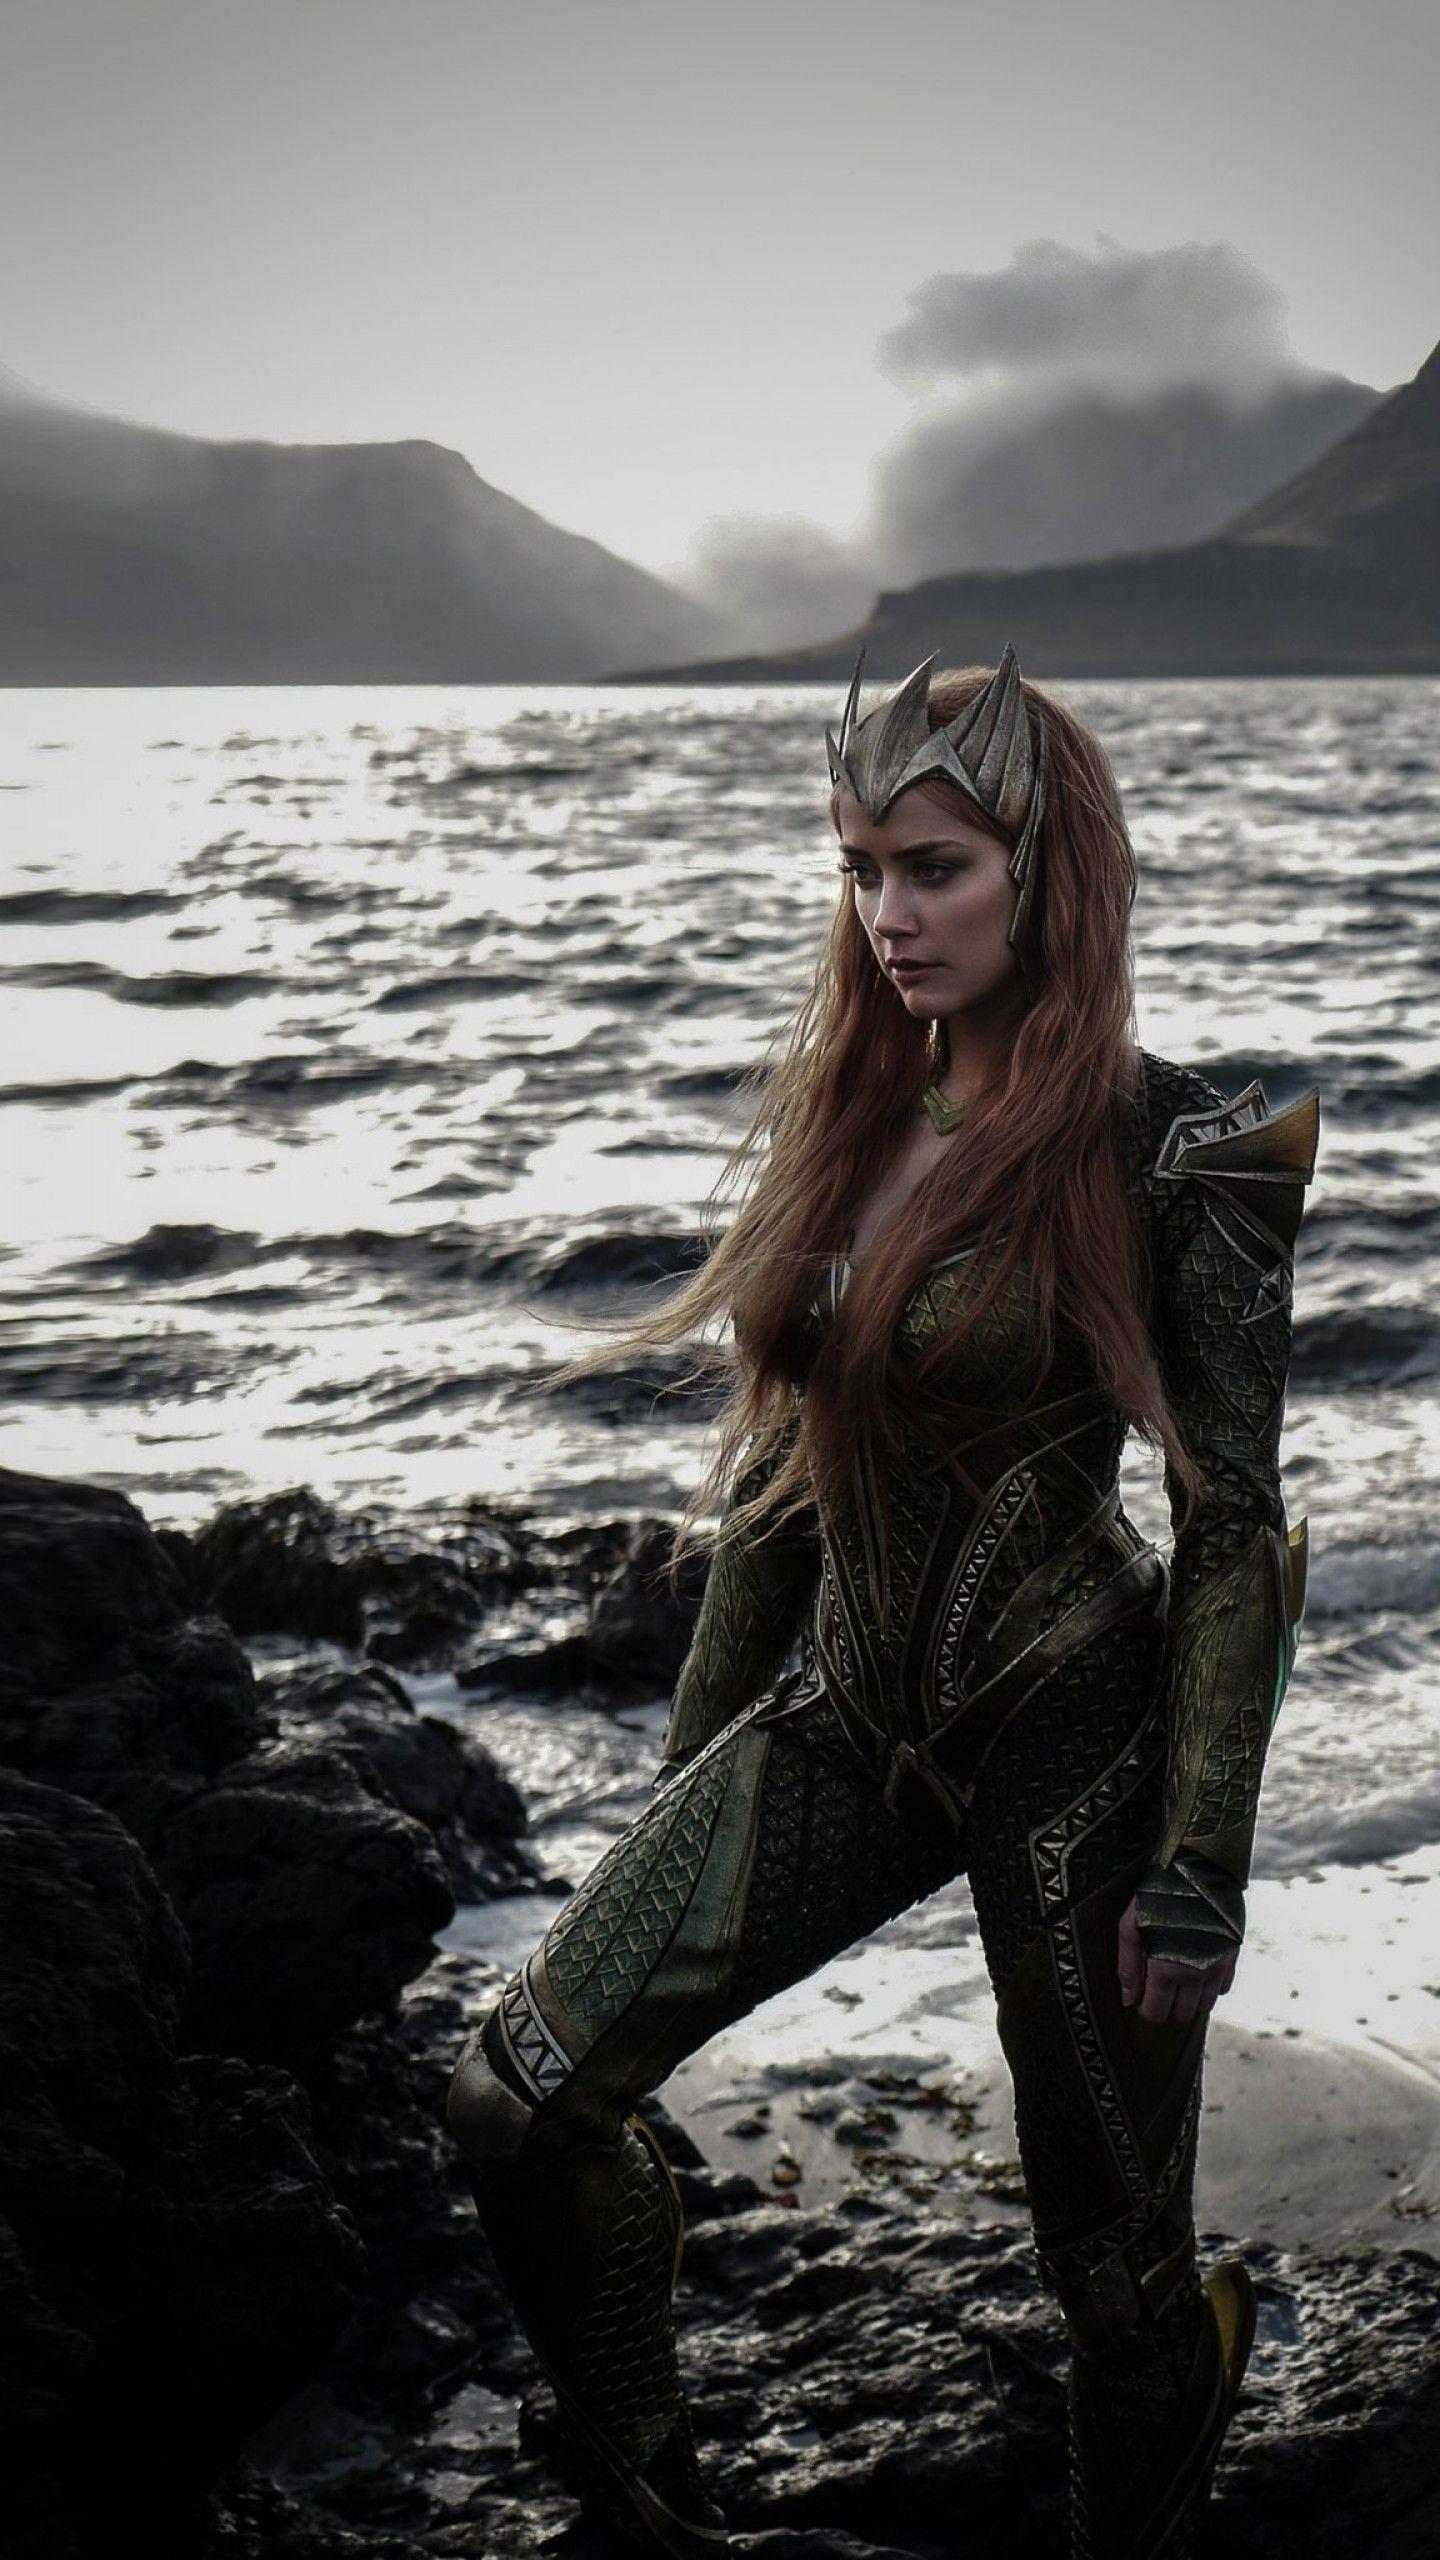 Wallpapers Justice League, amber heard, queen mera, Movies